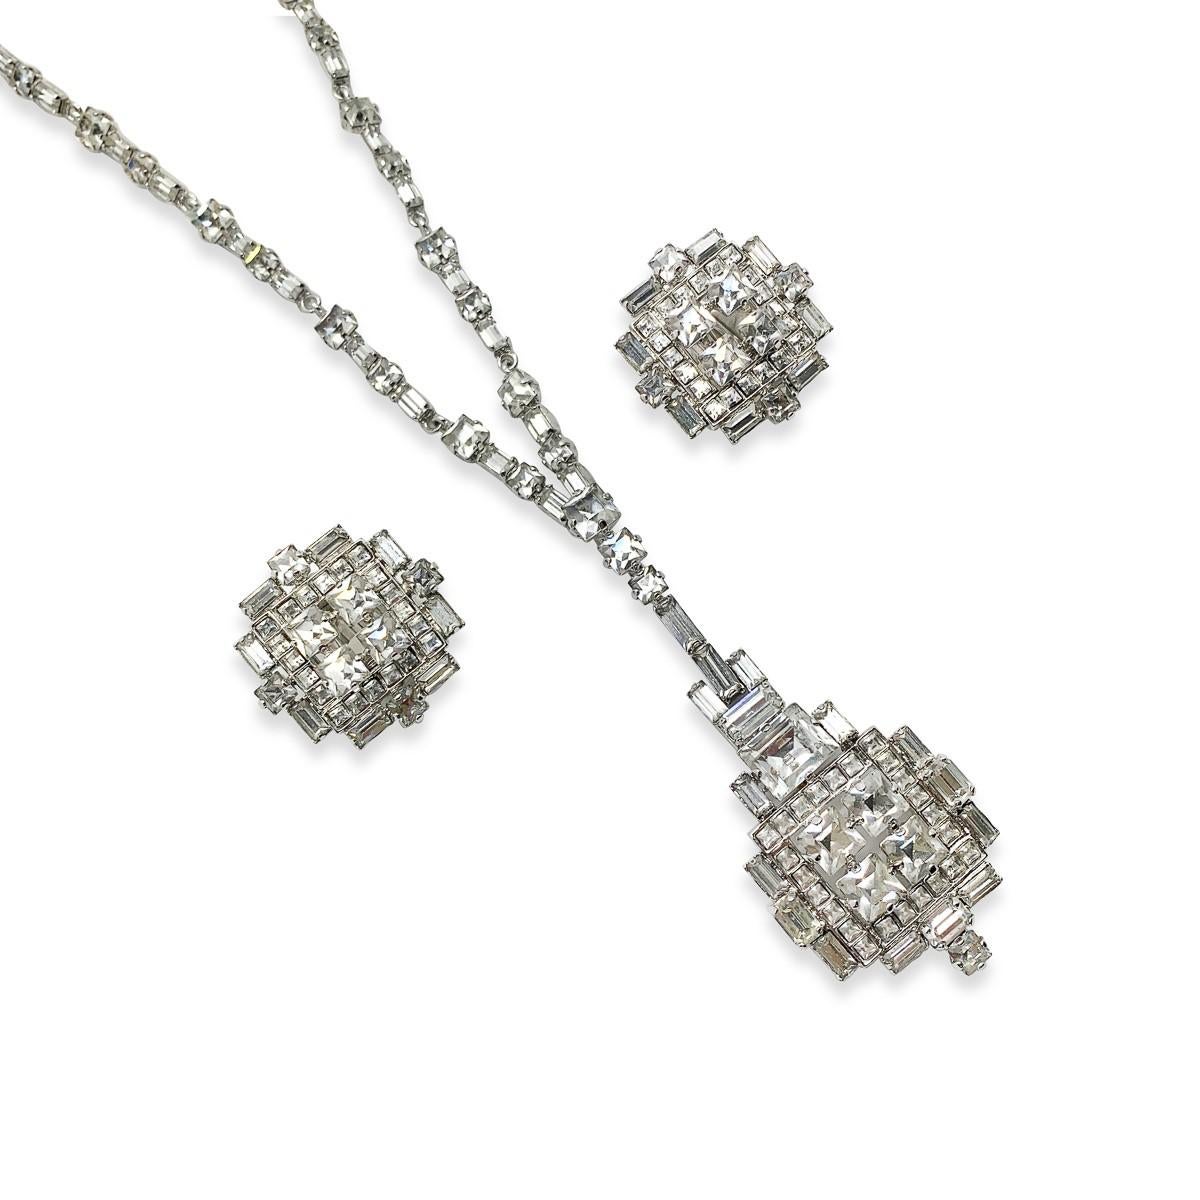 Exquisite Vintage Christian Dior Art Deco Cocktail Necklace & Earrings 1970s In Excellent Condition For Sale In Wilmslow, GB